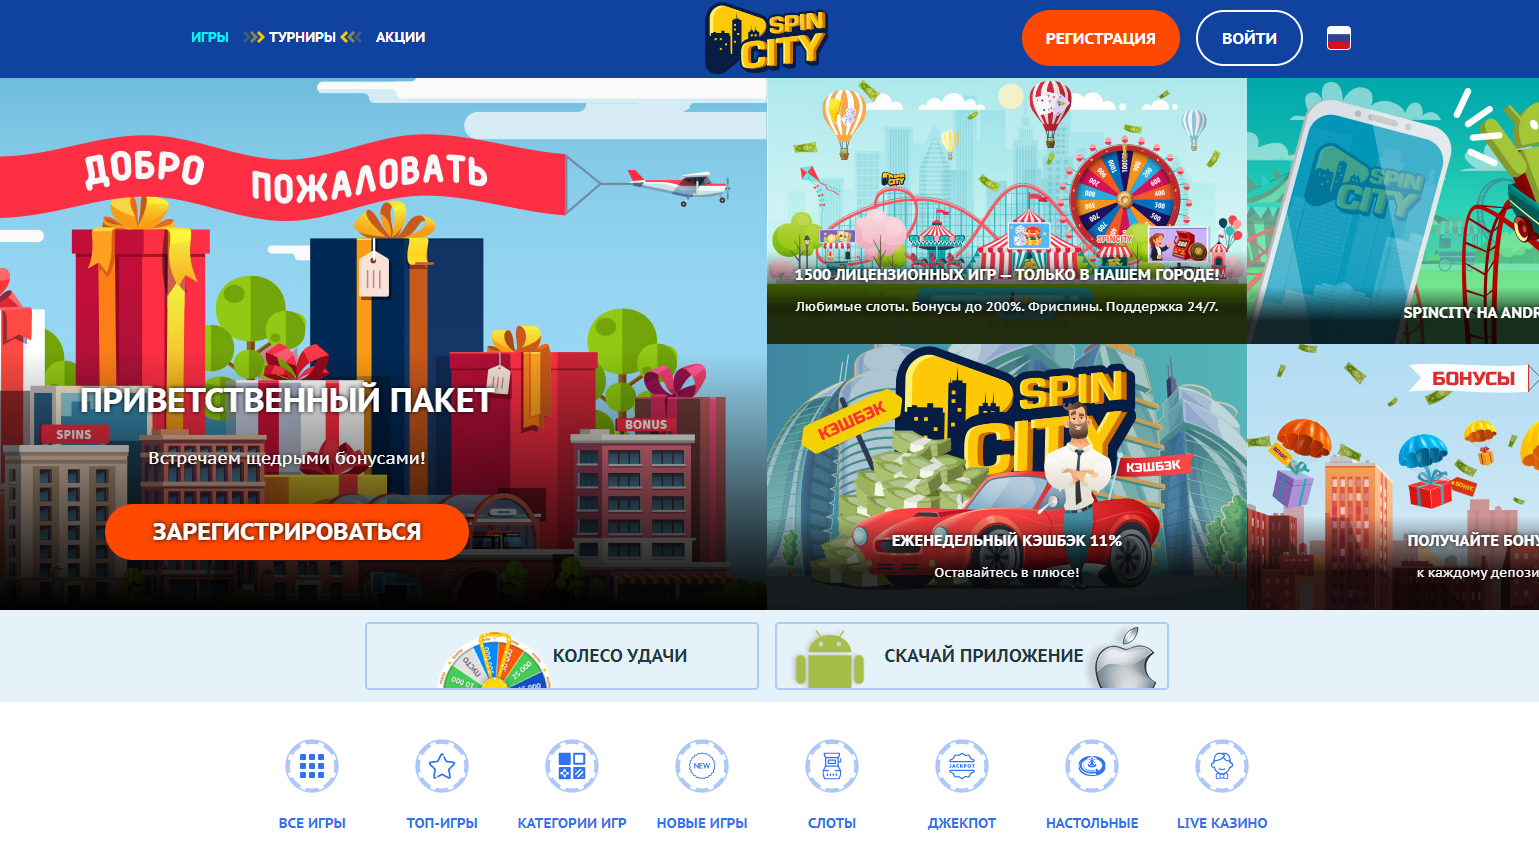 Spin city site